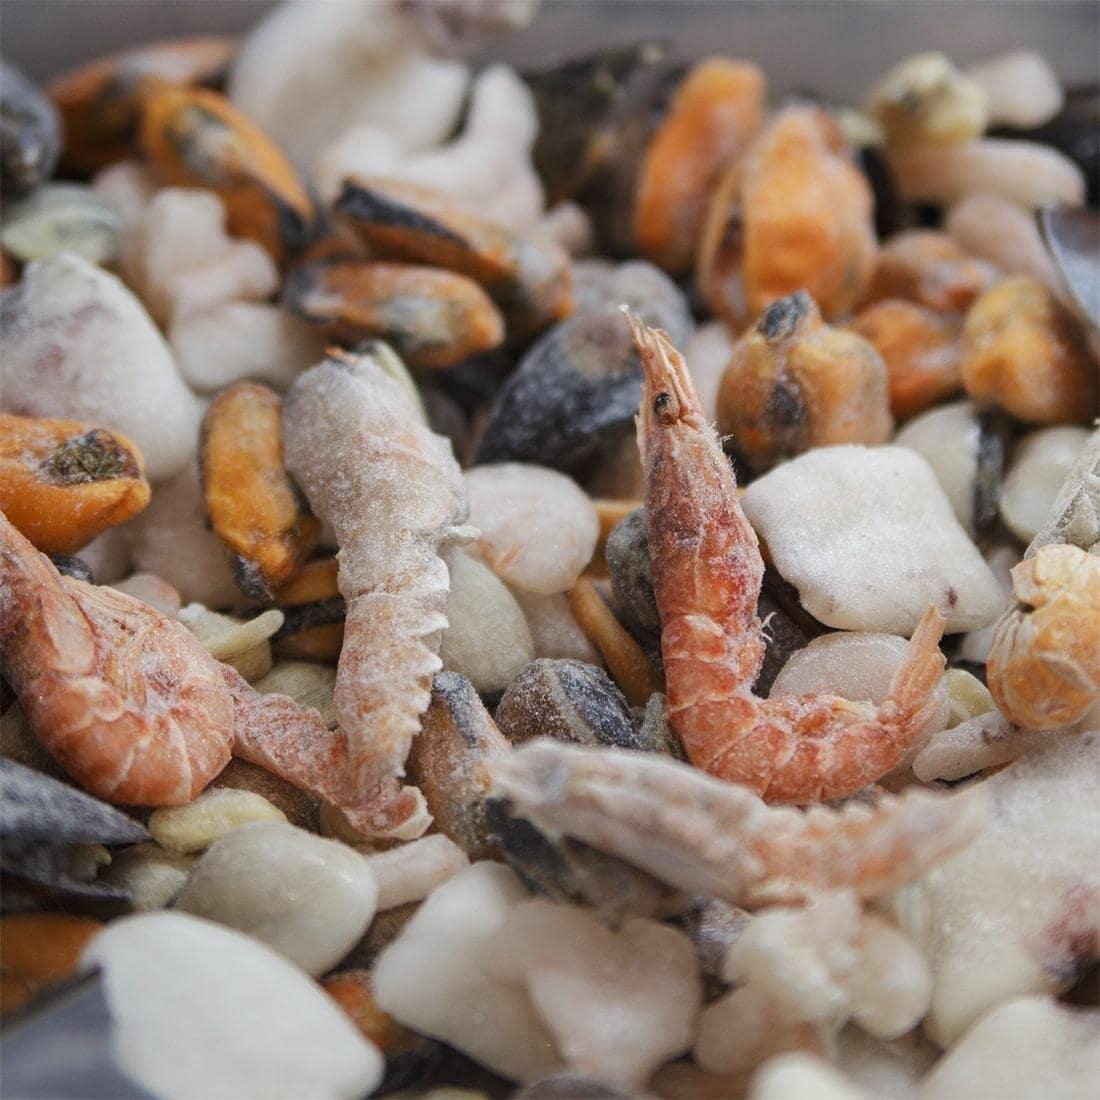 Image 1 of Mixed seafood